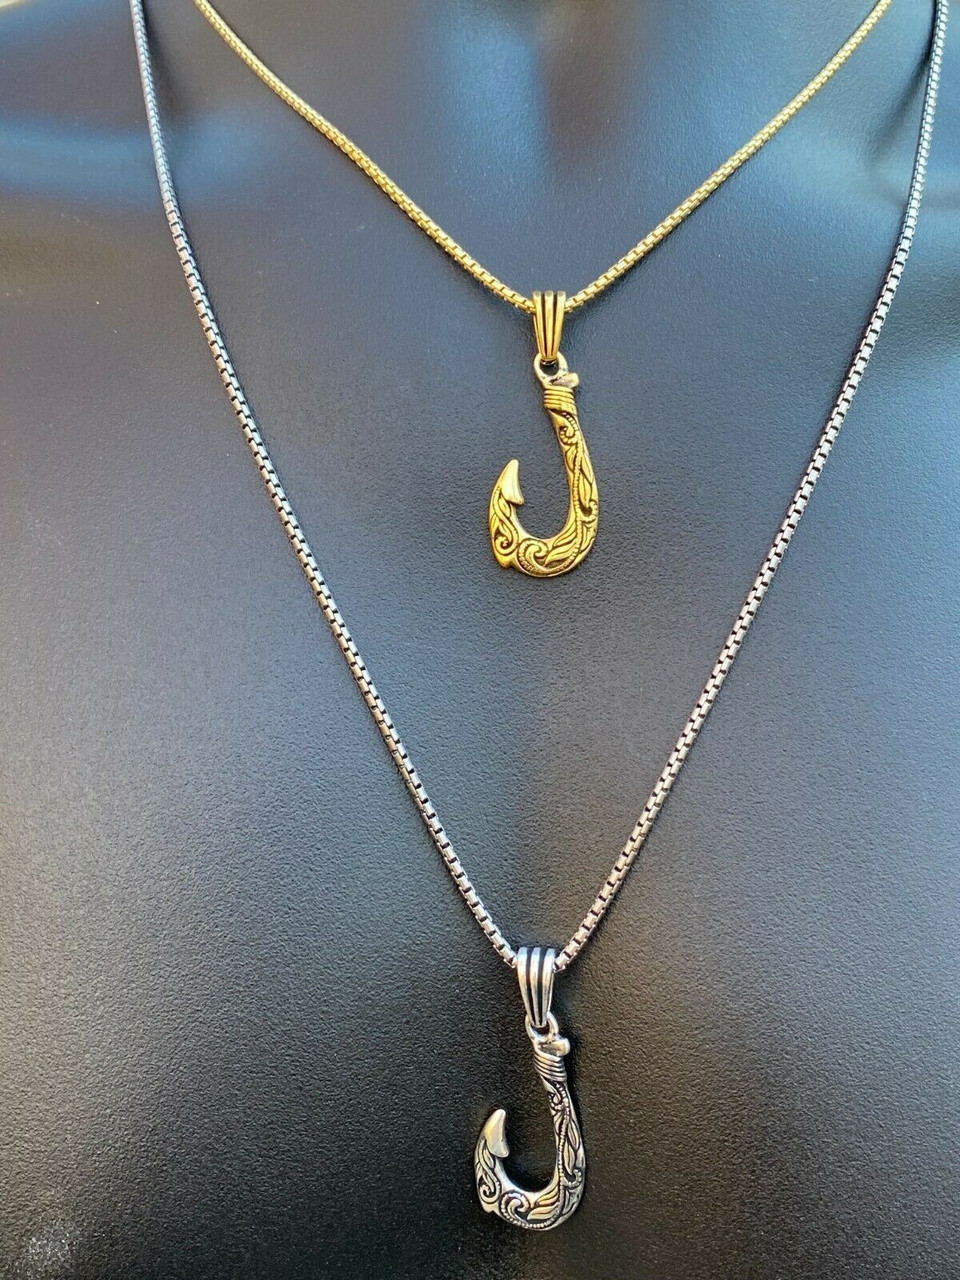 Real Solid 925 Sterling Silver Hawaiian Fishing Hook Large Mens Necklace  Gold